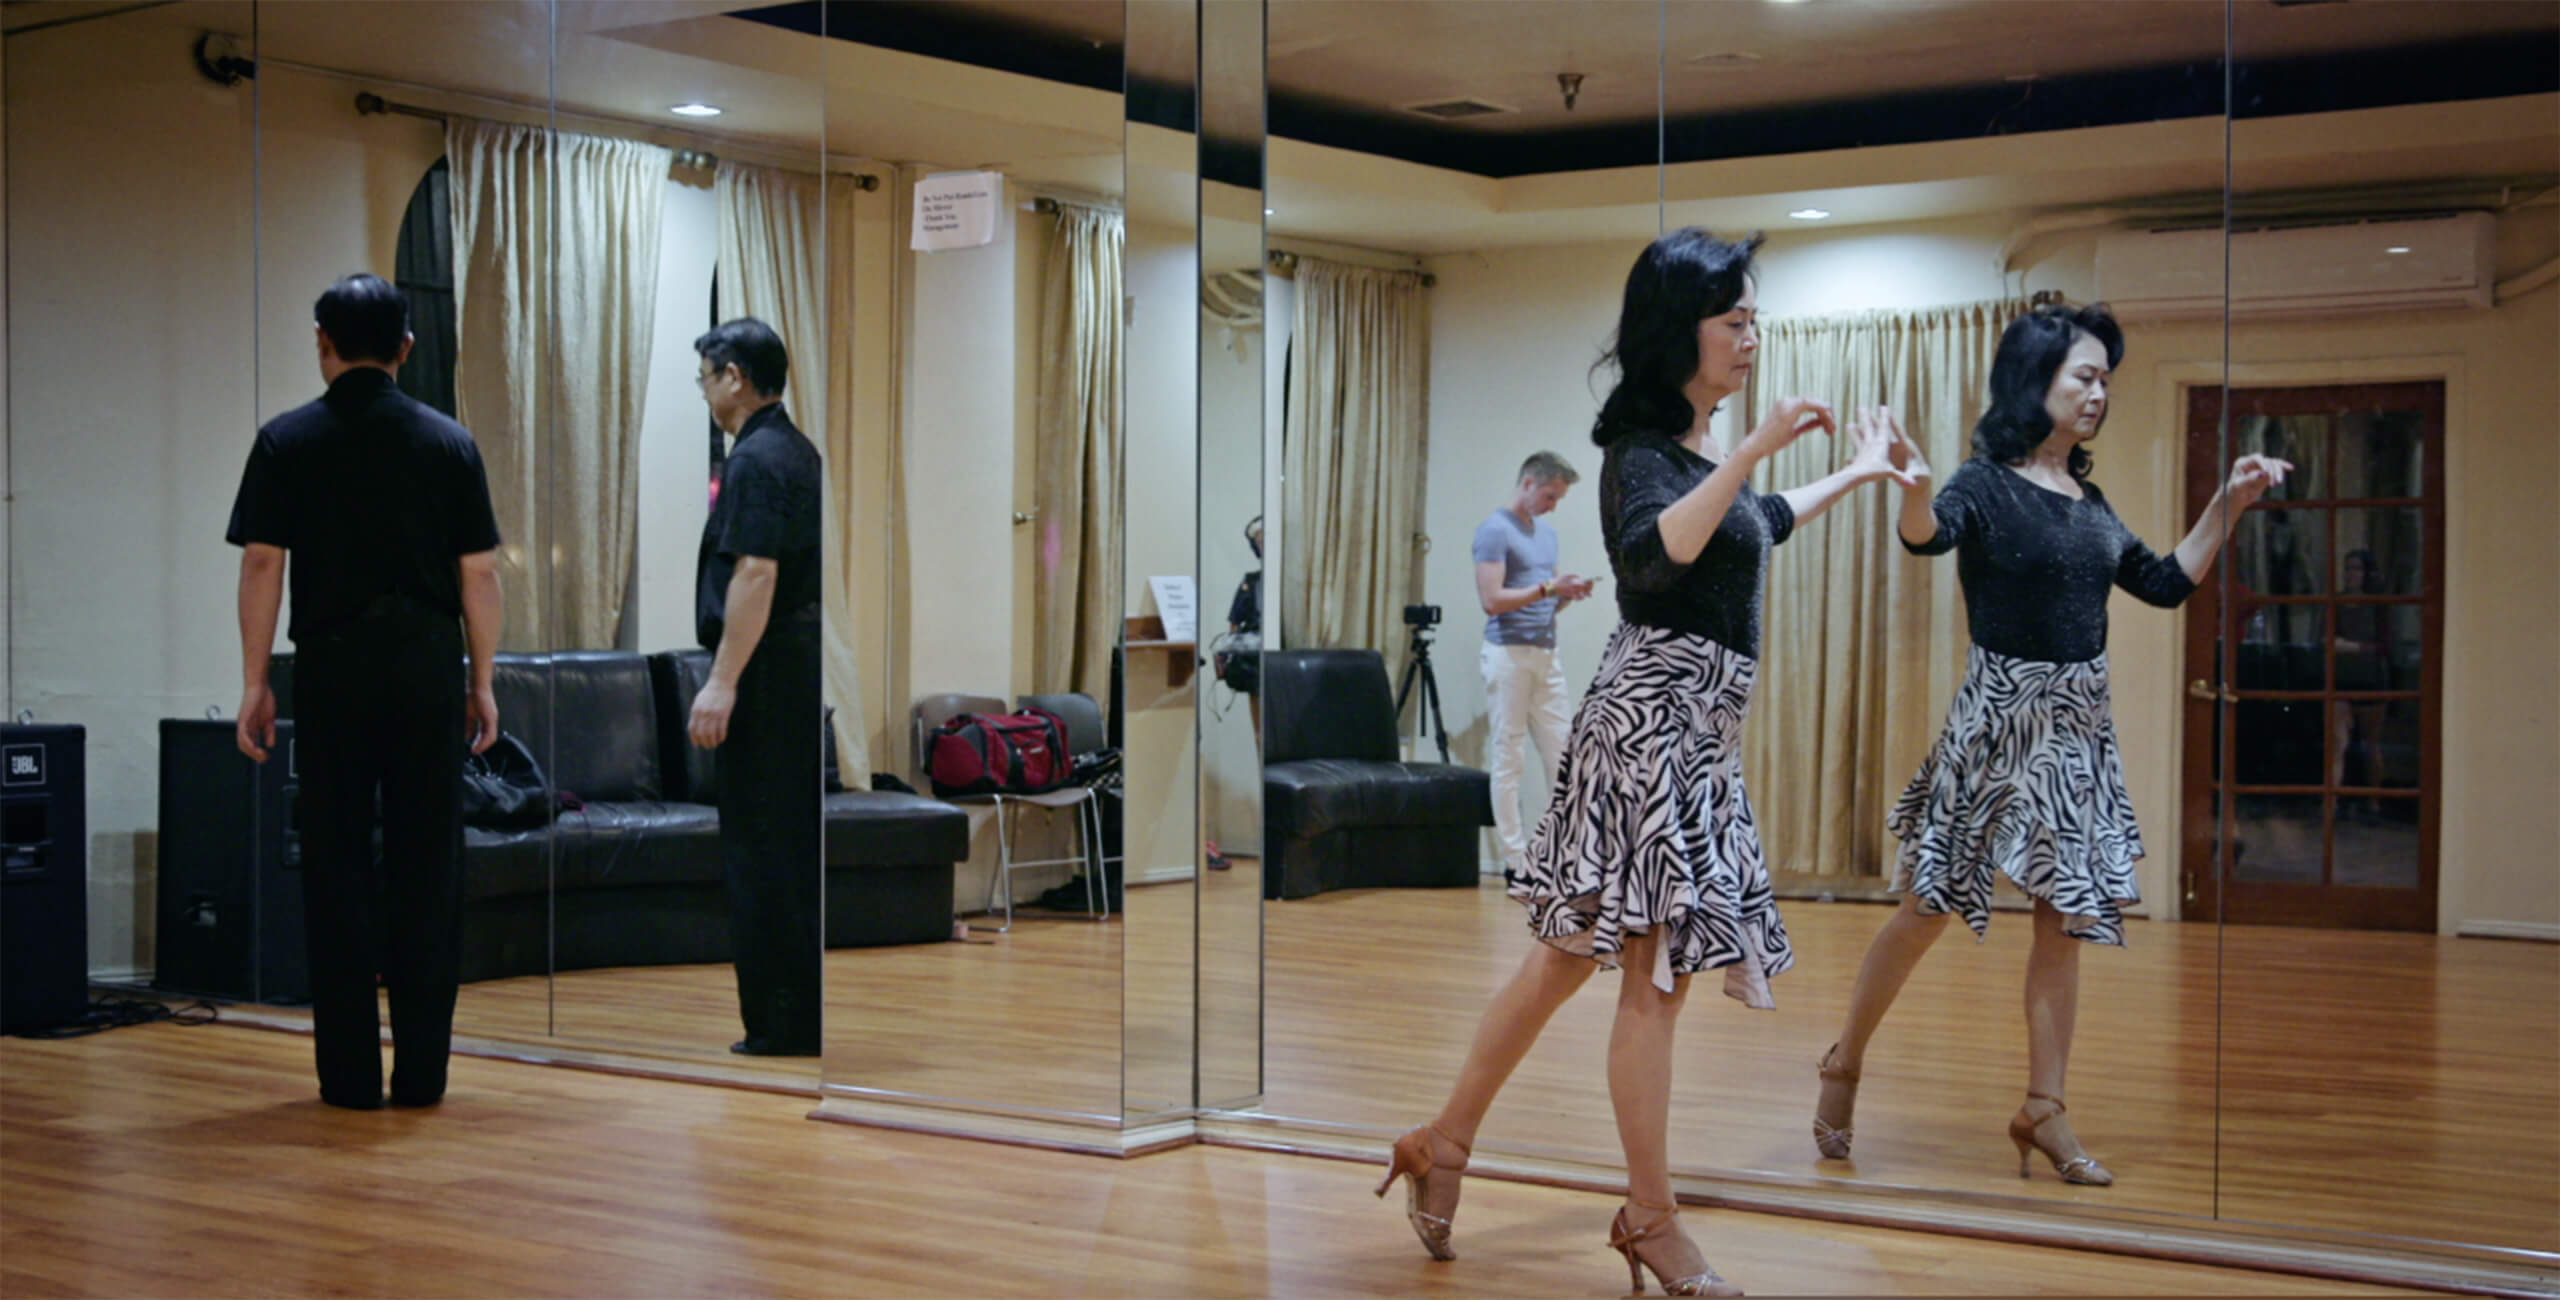 Middle Aged Asian couple at dance practice reflected in mirror